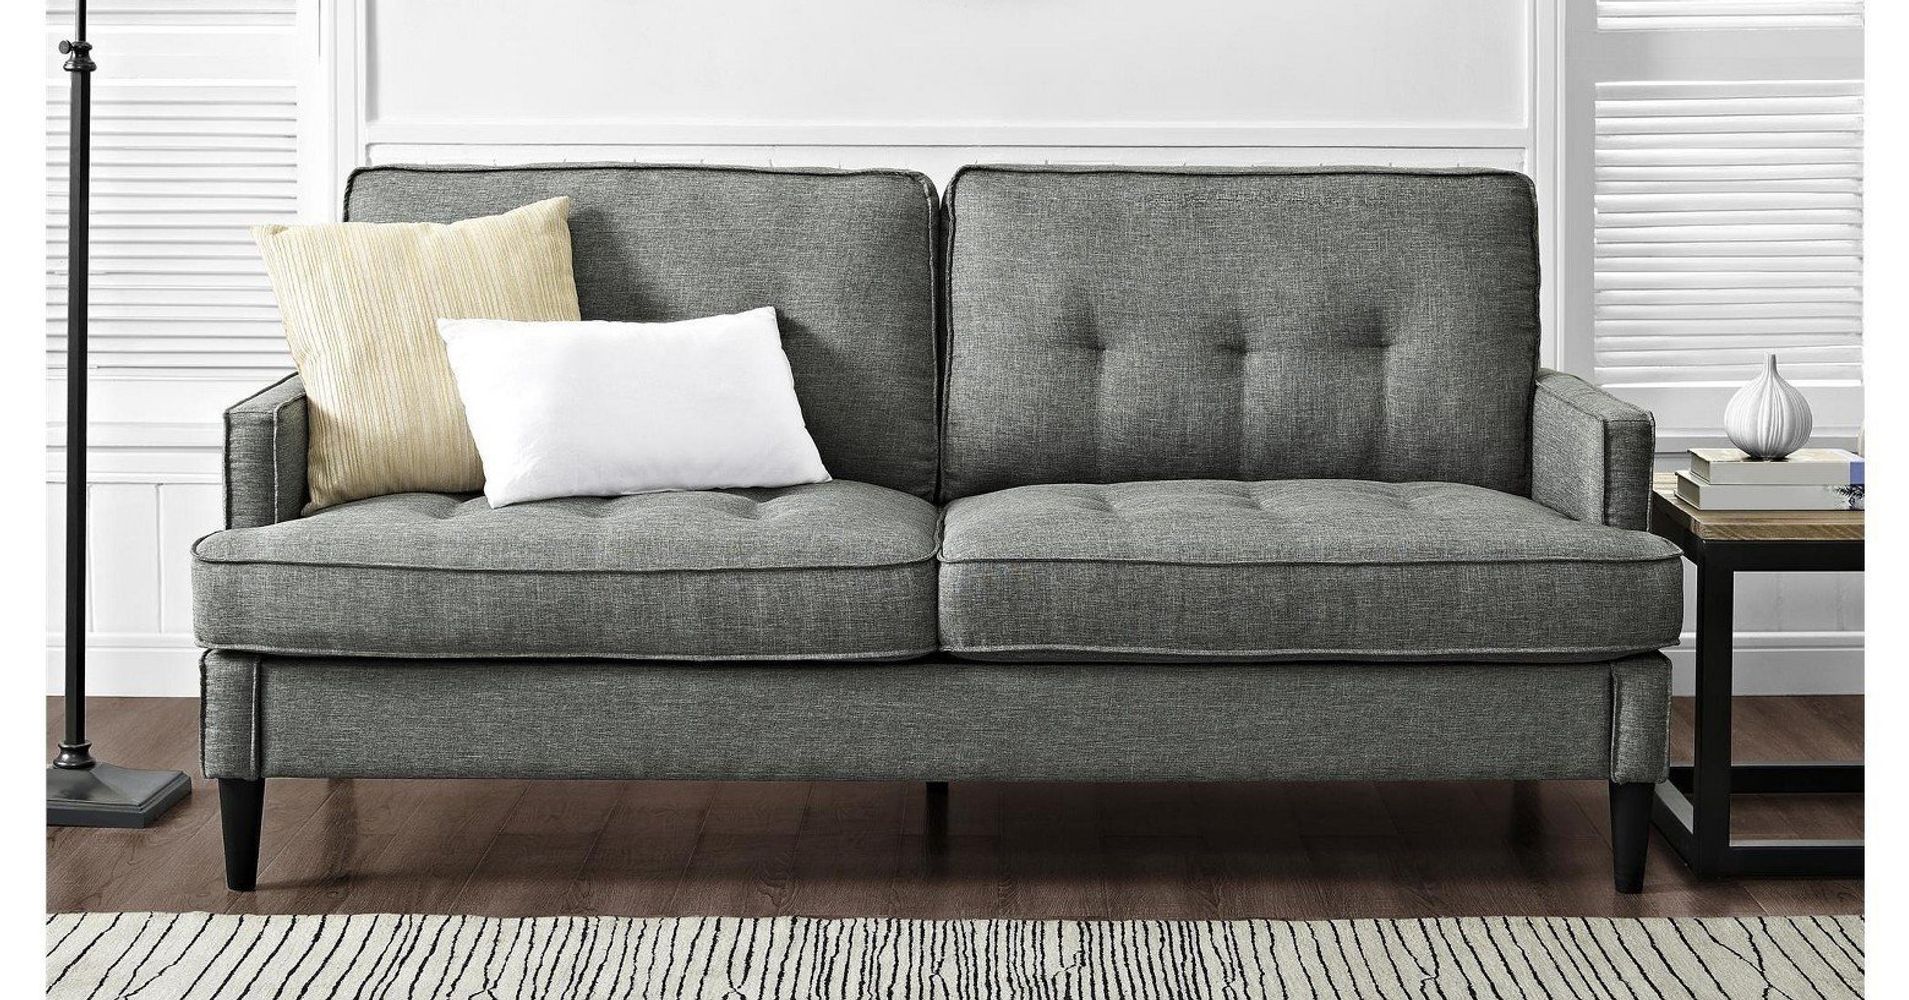 Small Cushy Couches For Living Room